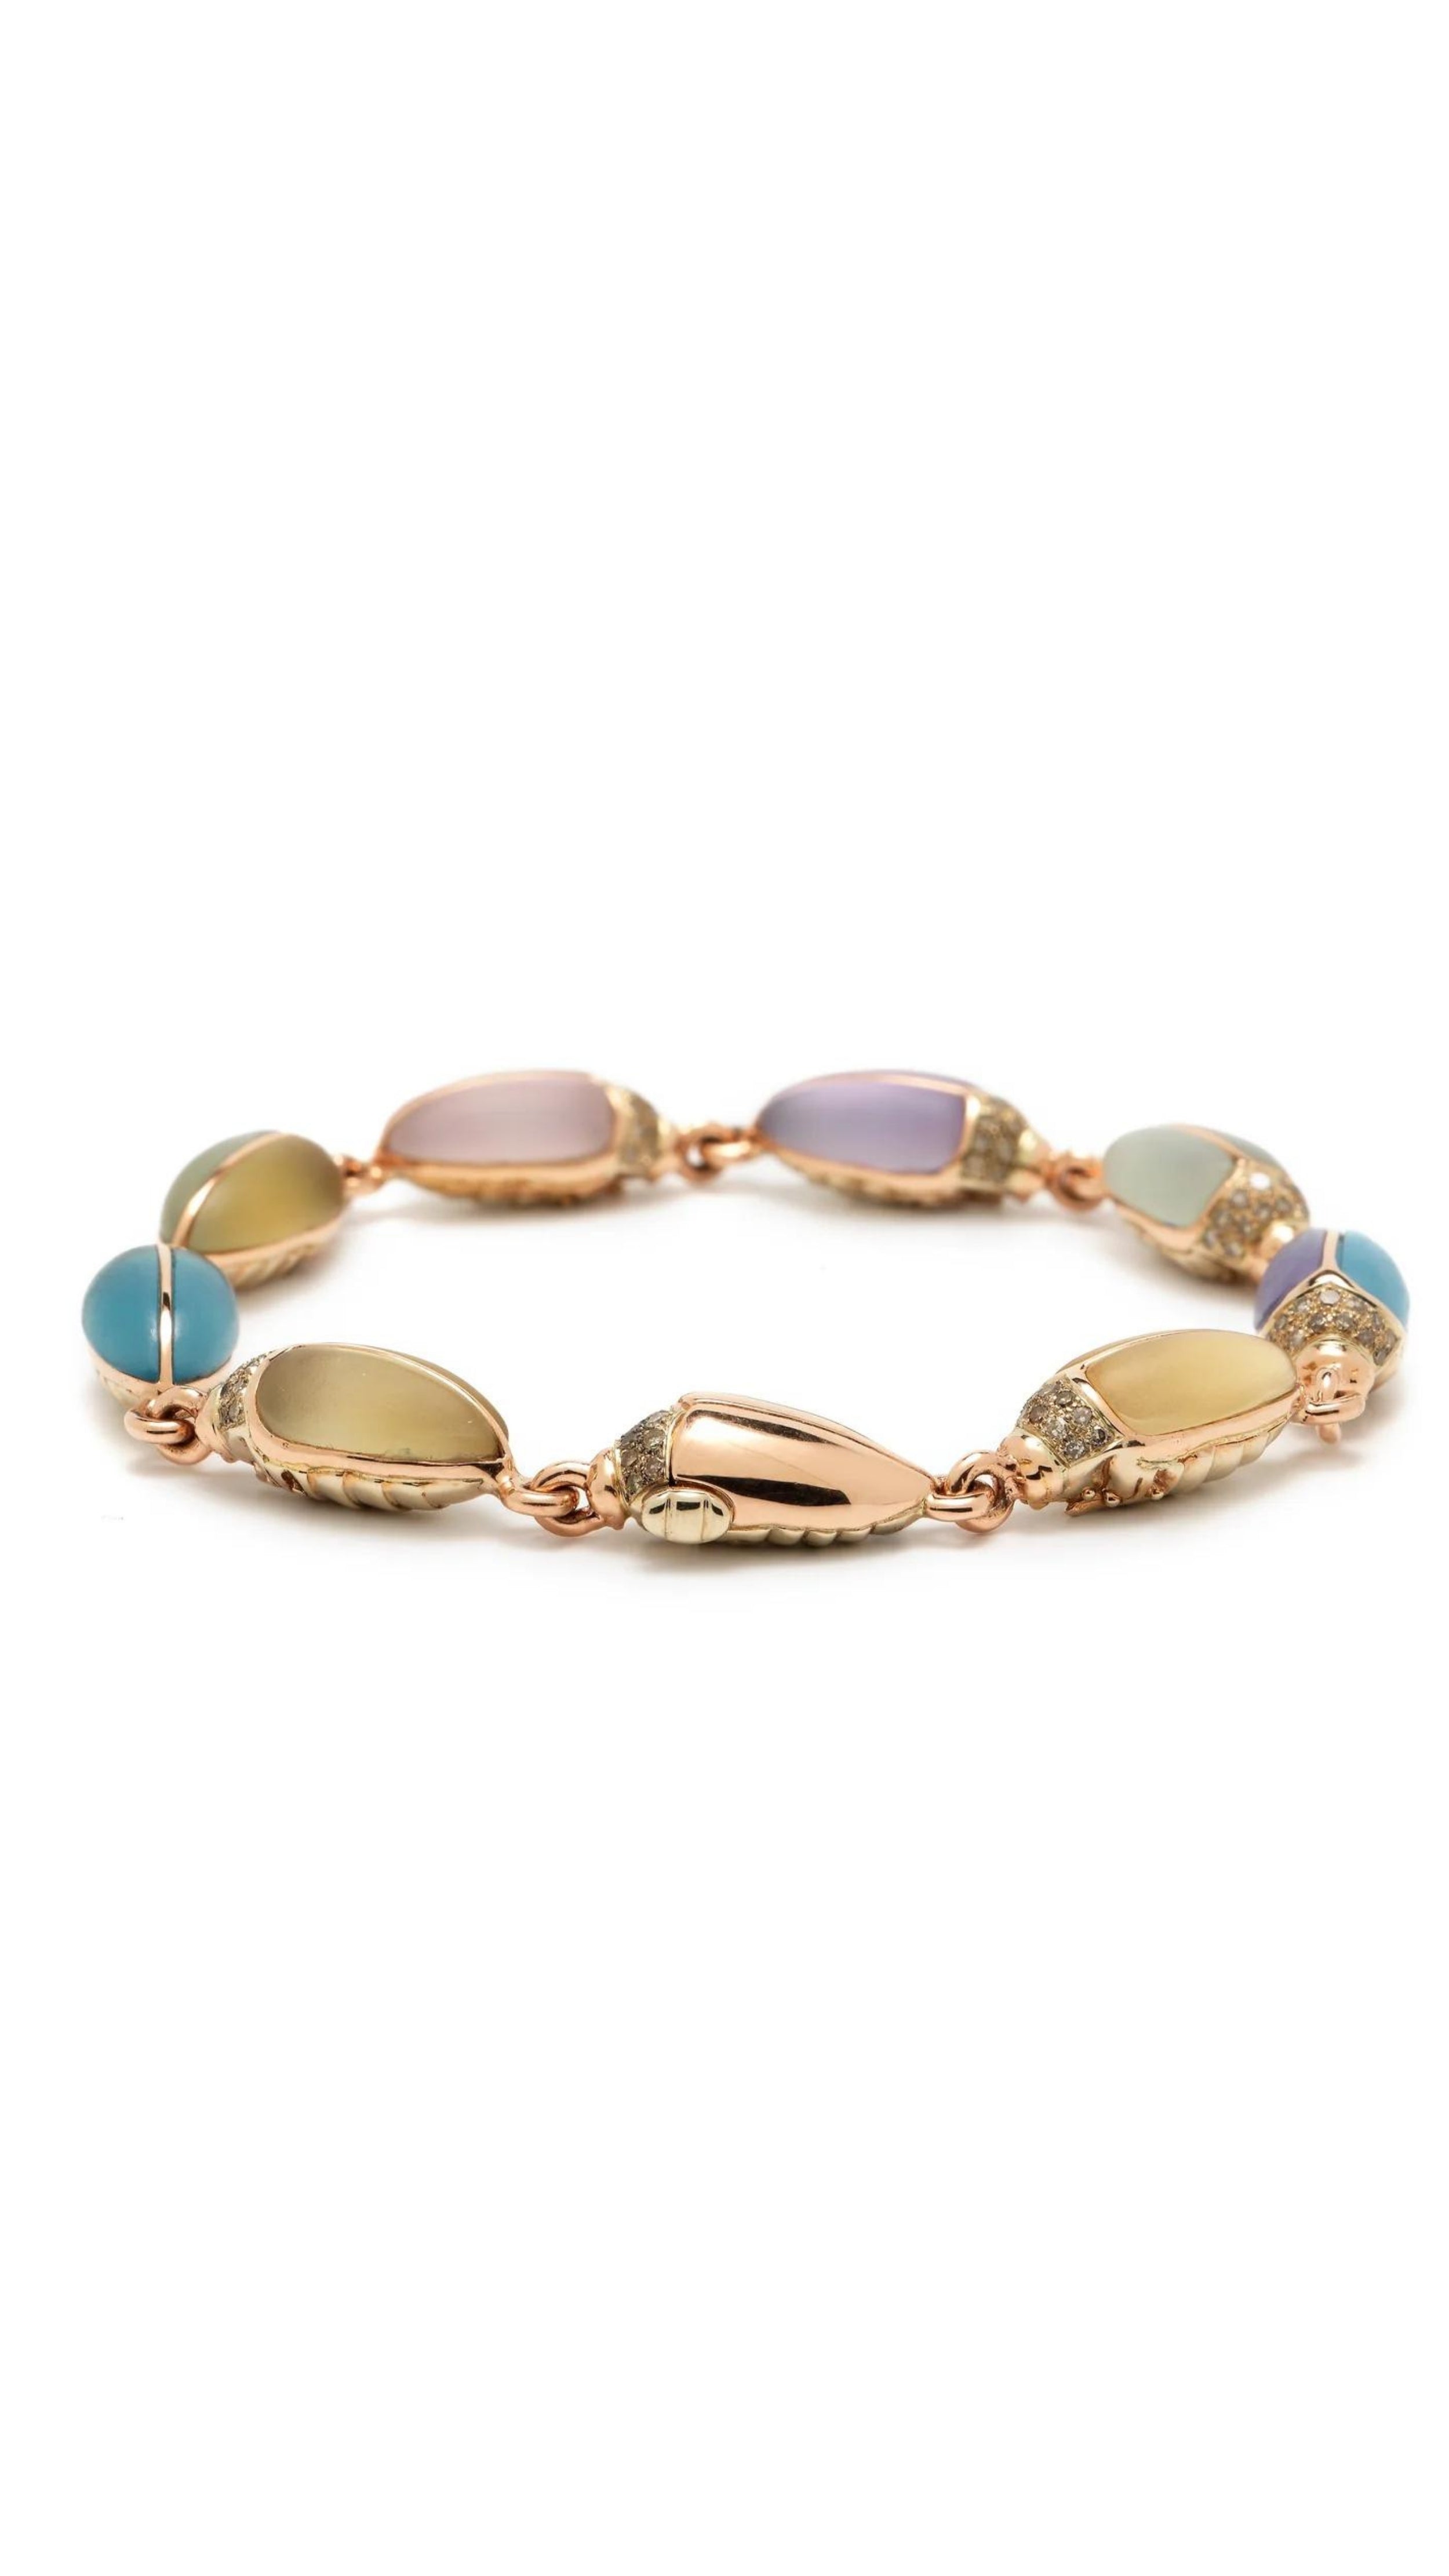 Bibi van der Velden Mini Scarab Eternity Bracelet. Made in 18k rose gold, this bracelet has nine  scarab beetles, each made with translucent, matte gemstones in soft shades. The beetles&#39; heads are paved with pale brown diamonds. Shown from the side view.